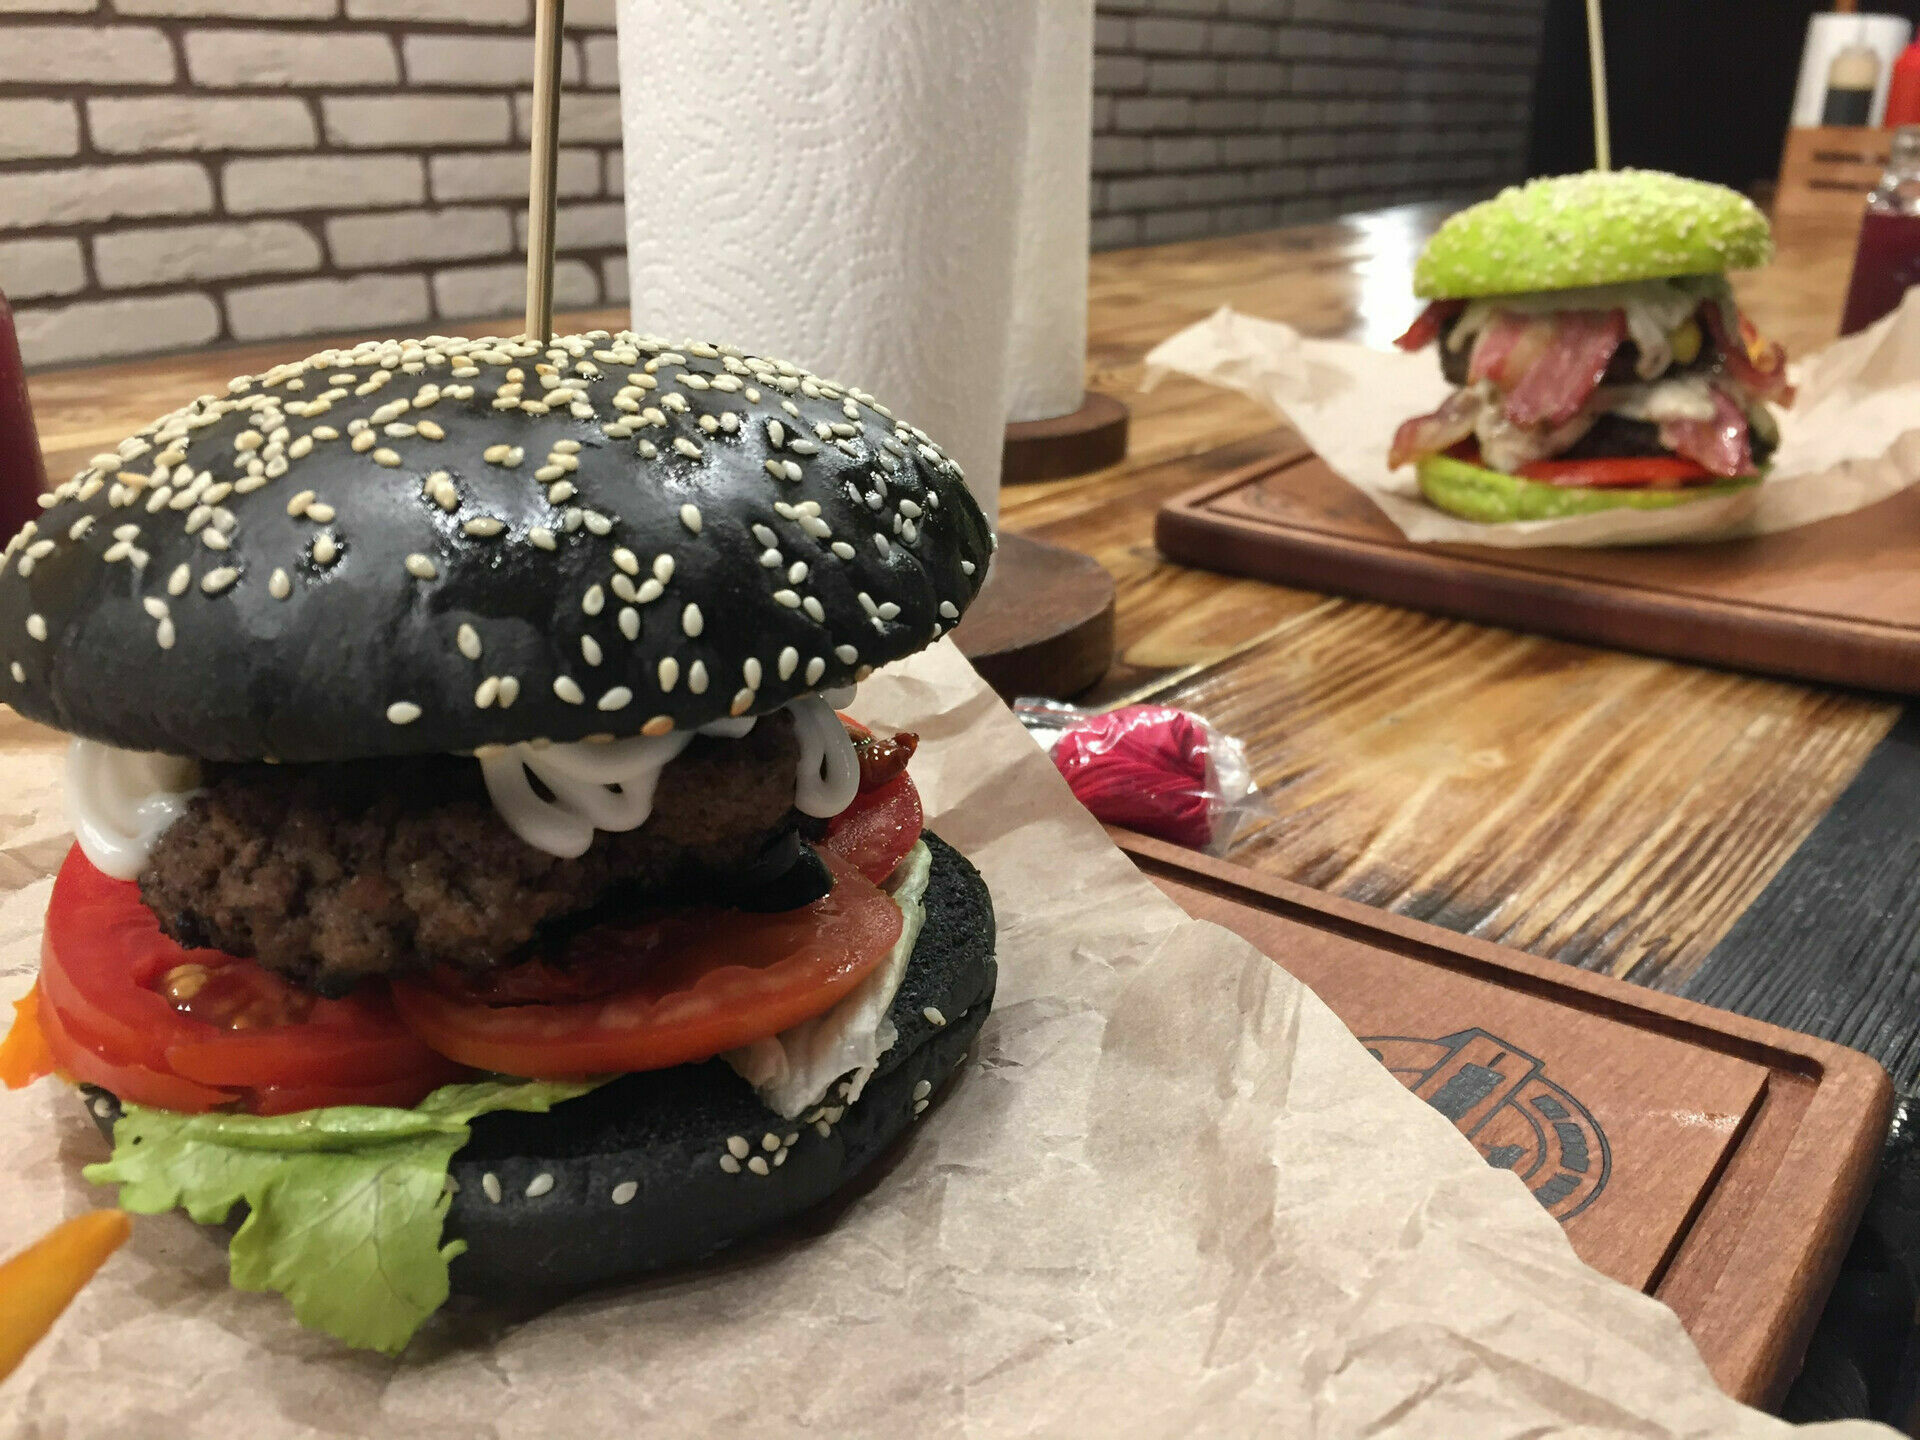 The average price of a burger rose to 311 rubles